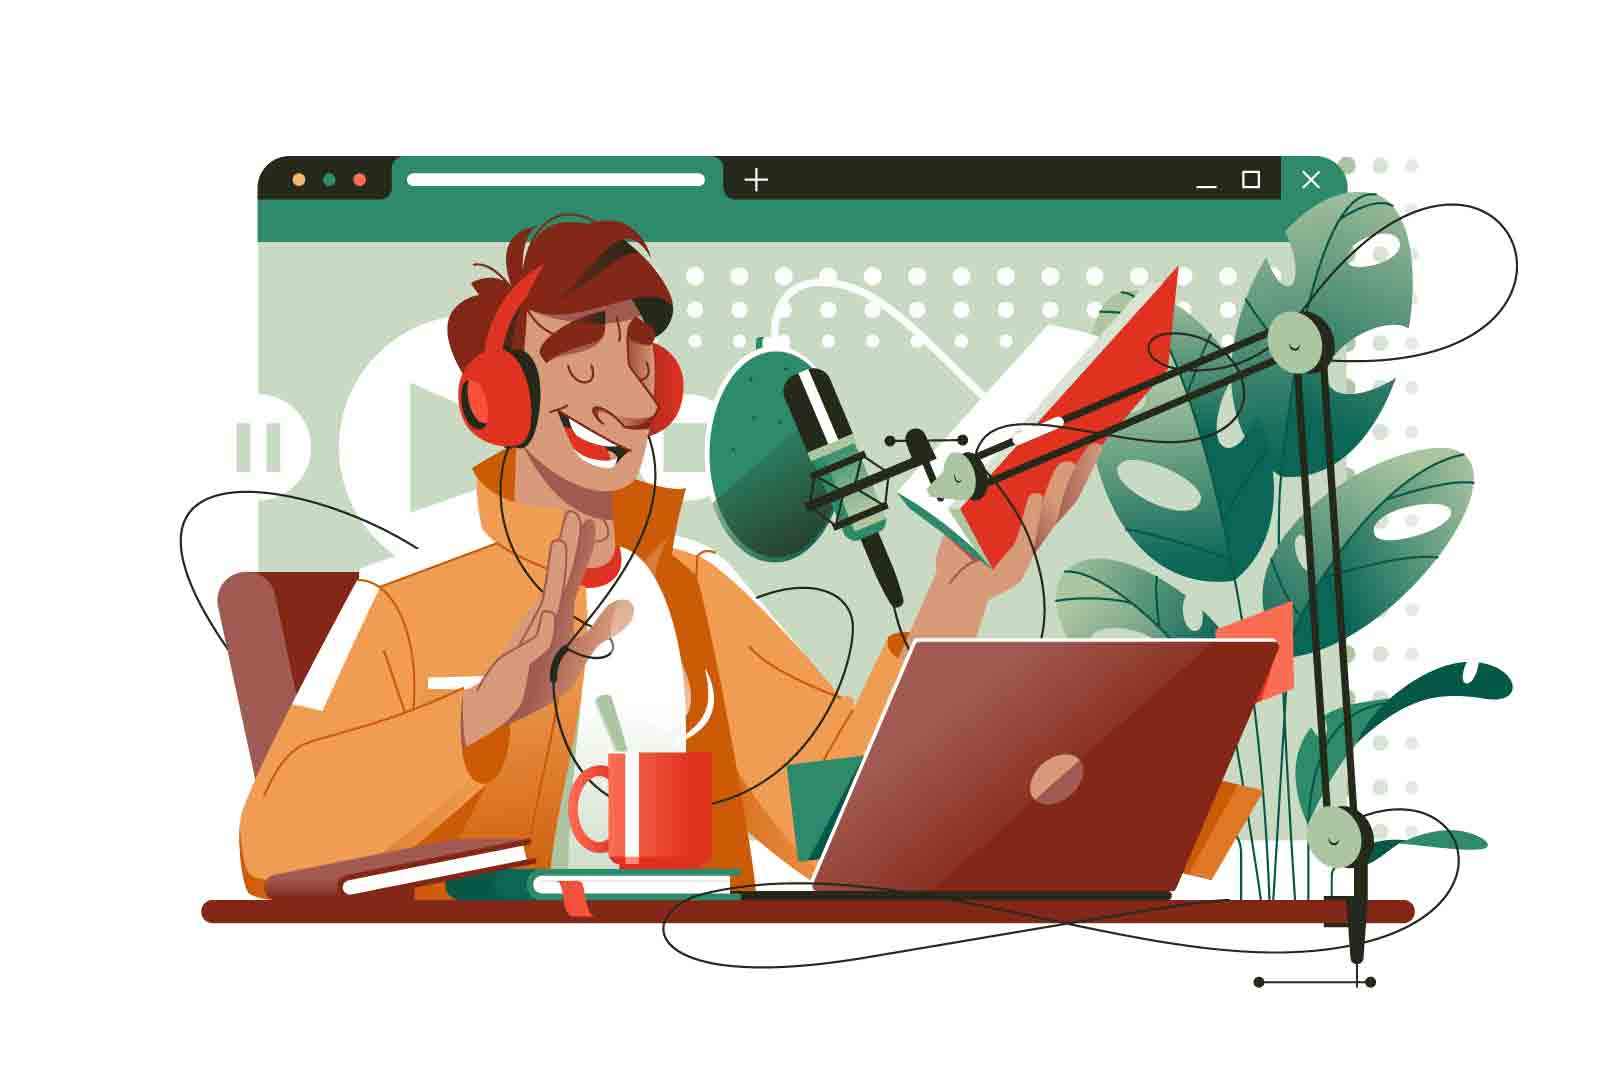 Podcast recording and broadcasting vector illustration. Podcaster talking with audience. Radio, audio streaming service